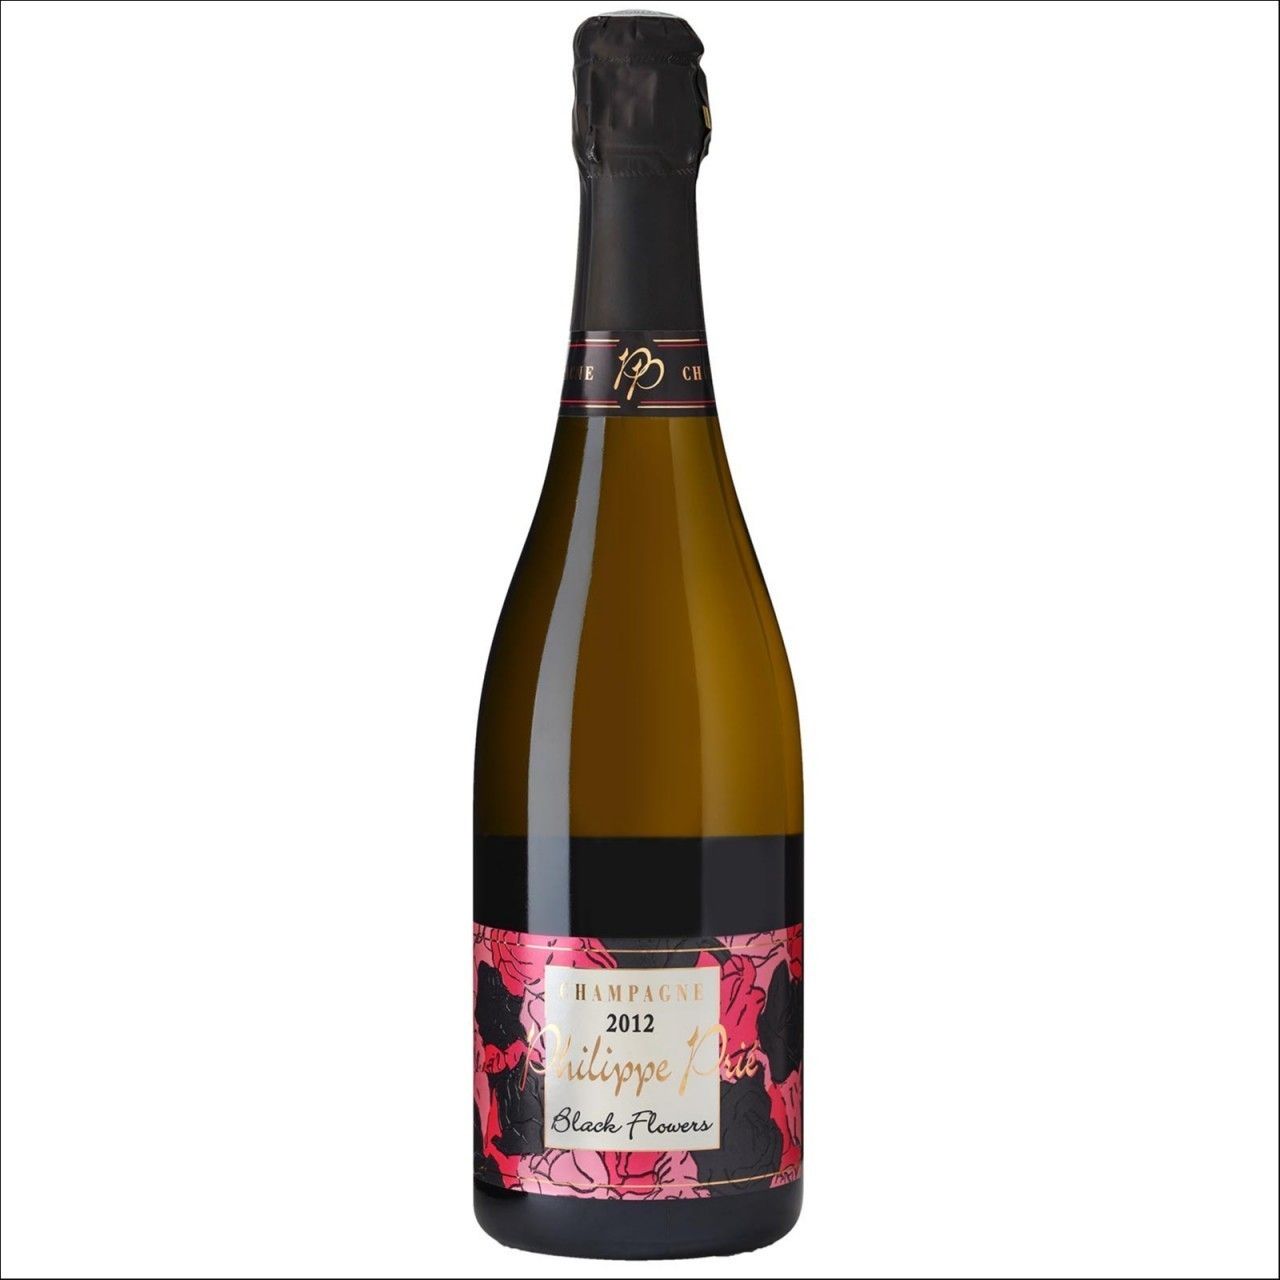 CHRYSOBULLE BY PRIE - CHAMPAGNE - Troyes : Black Flowers Millésime 2012